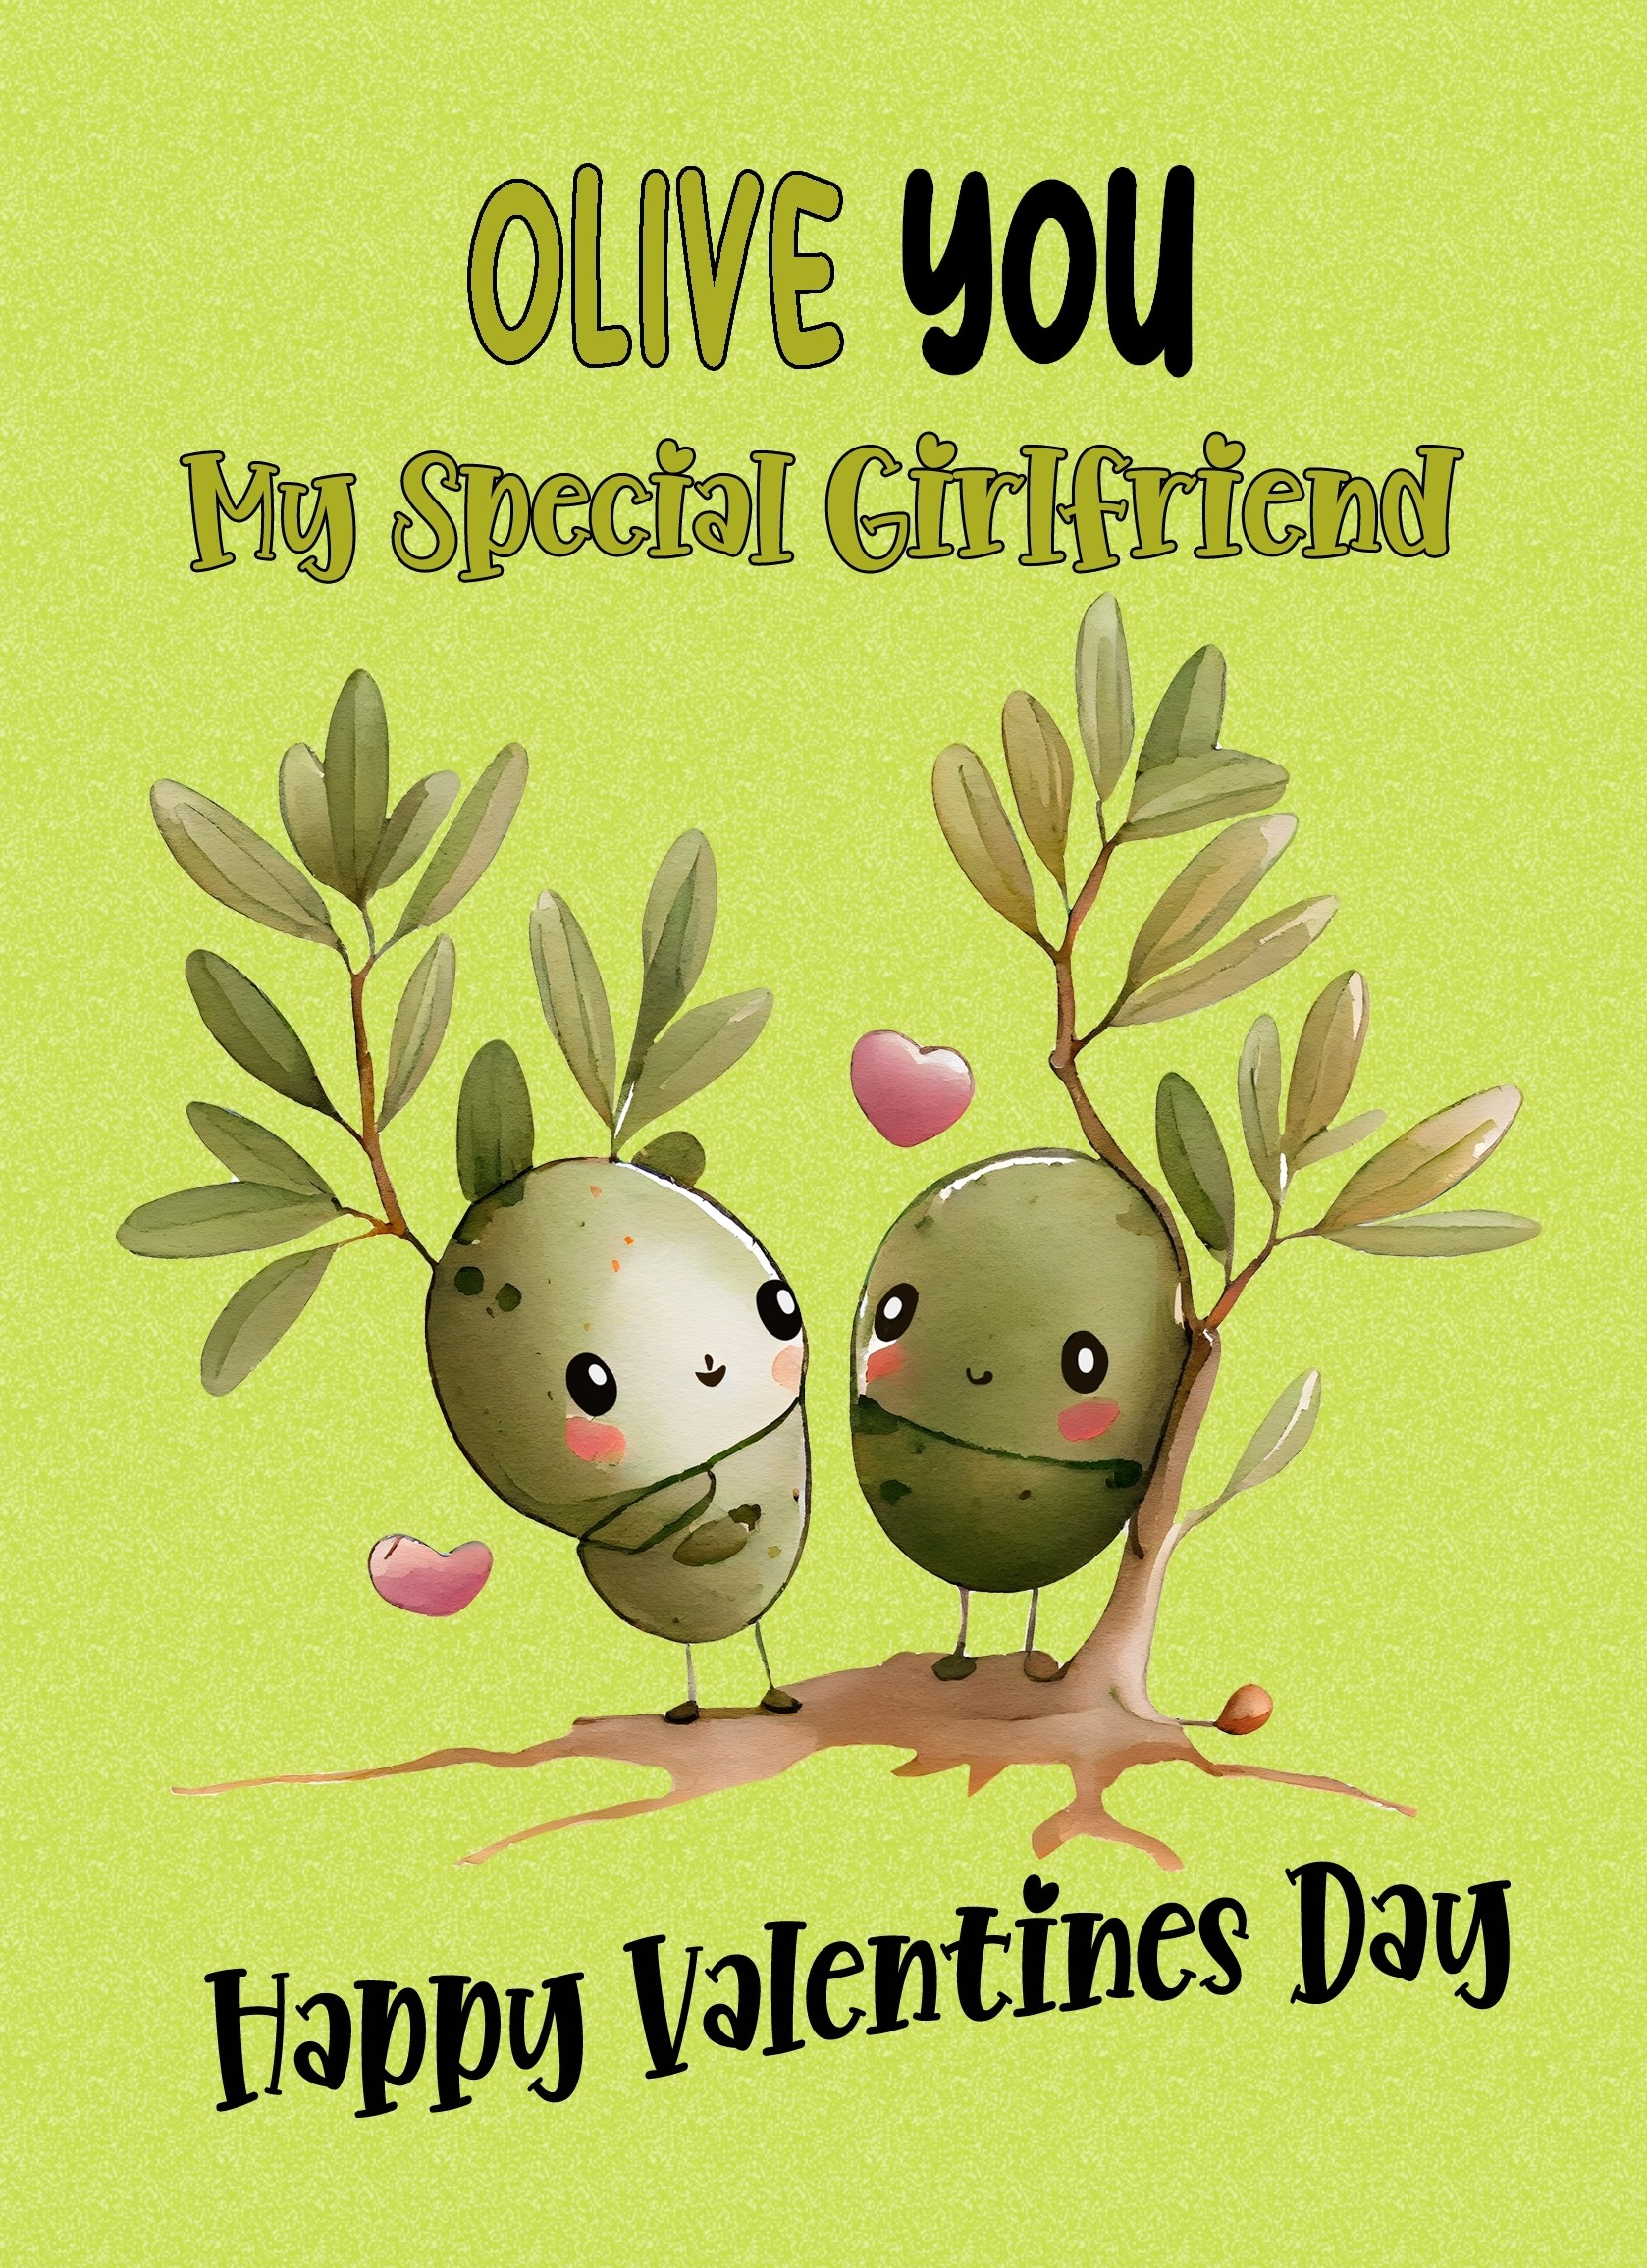 Funny Pun Valentines Day Card for Girlfriend (Olive You)